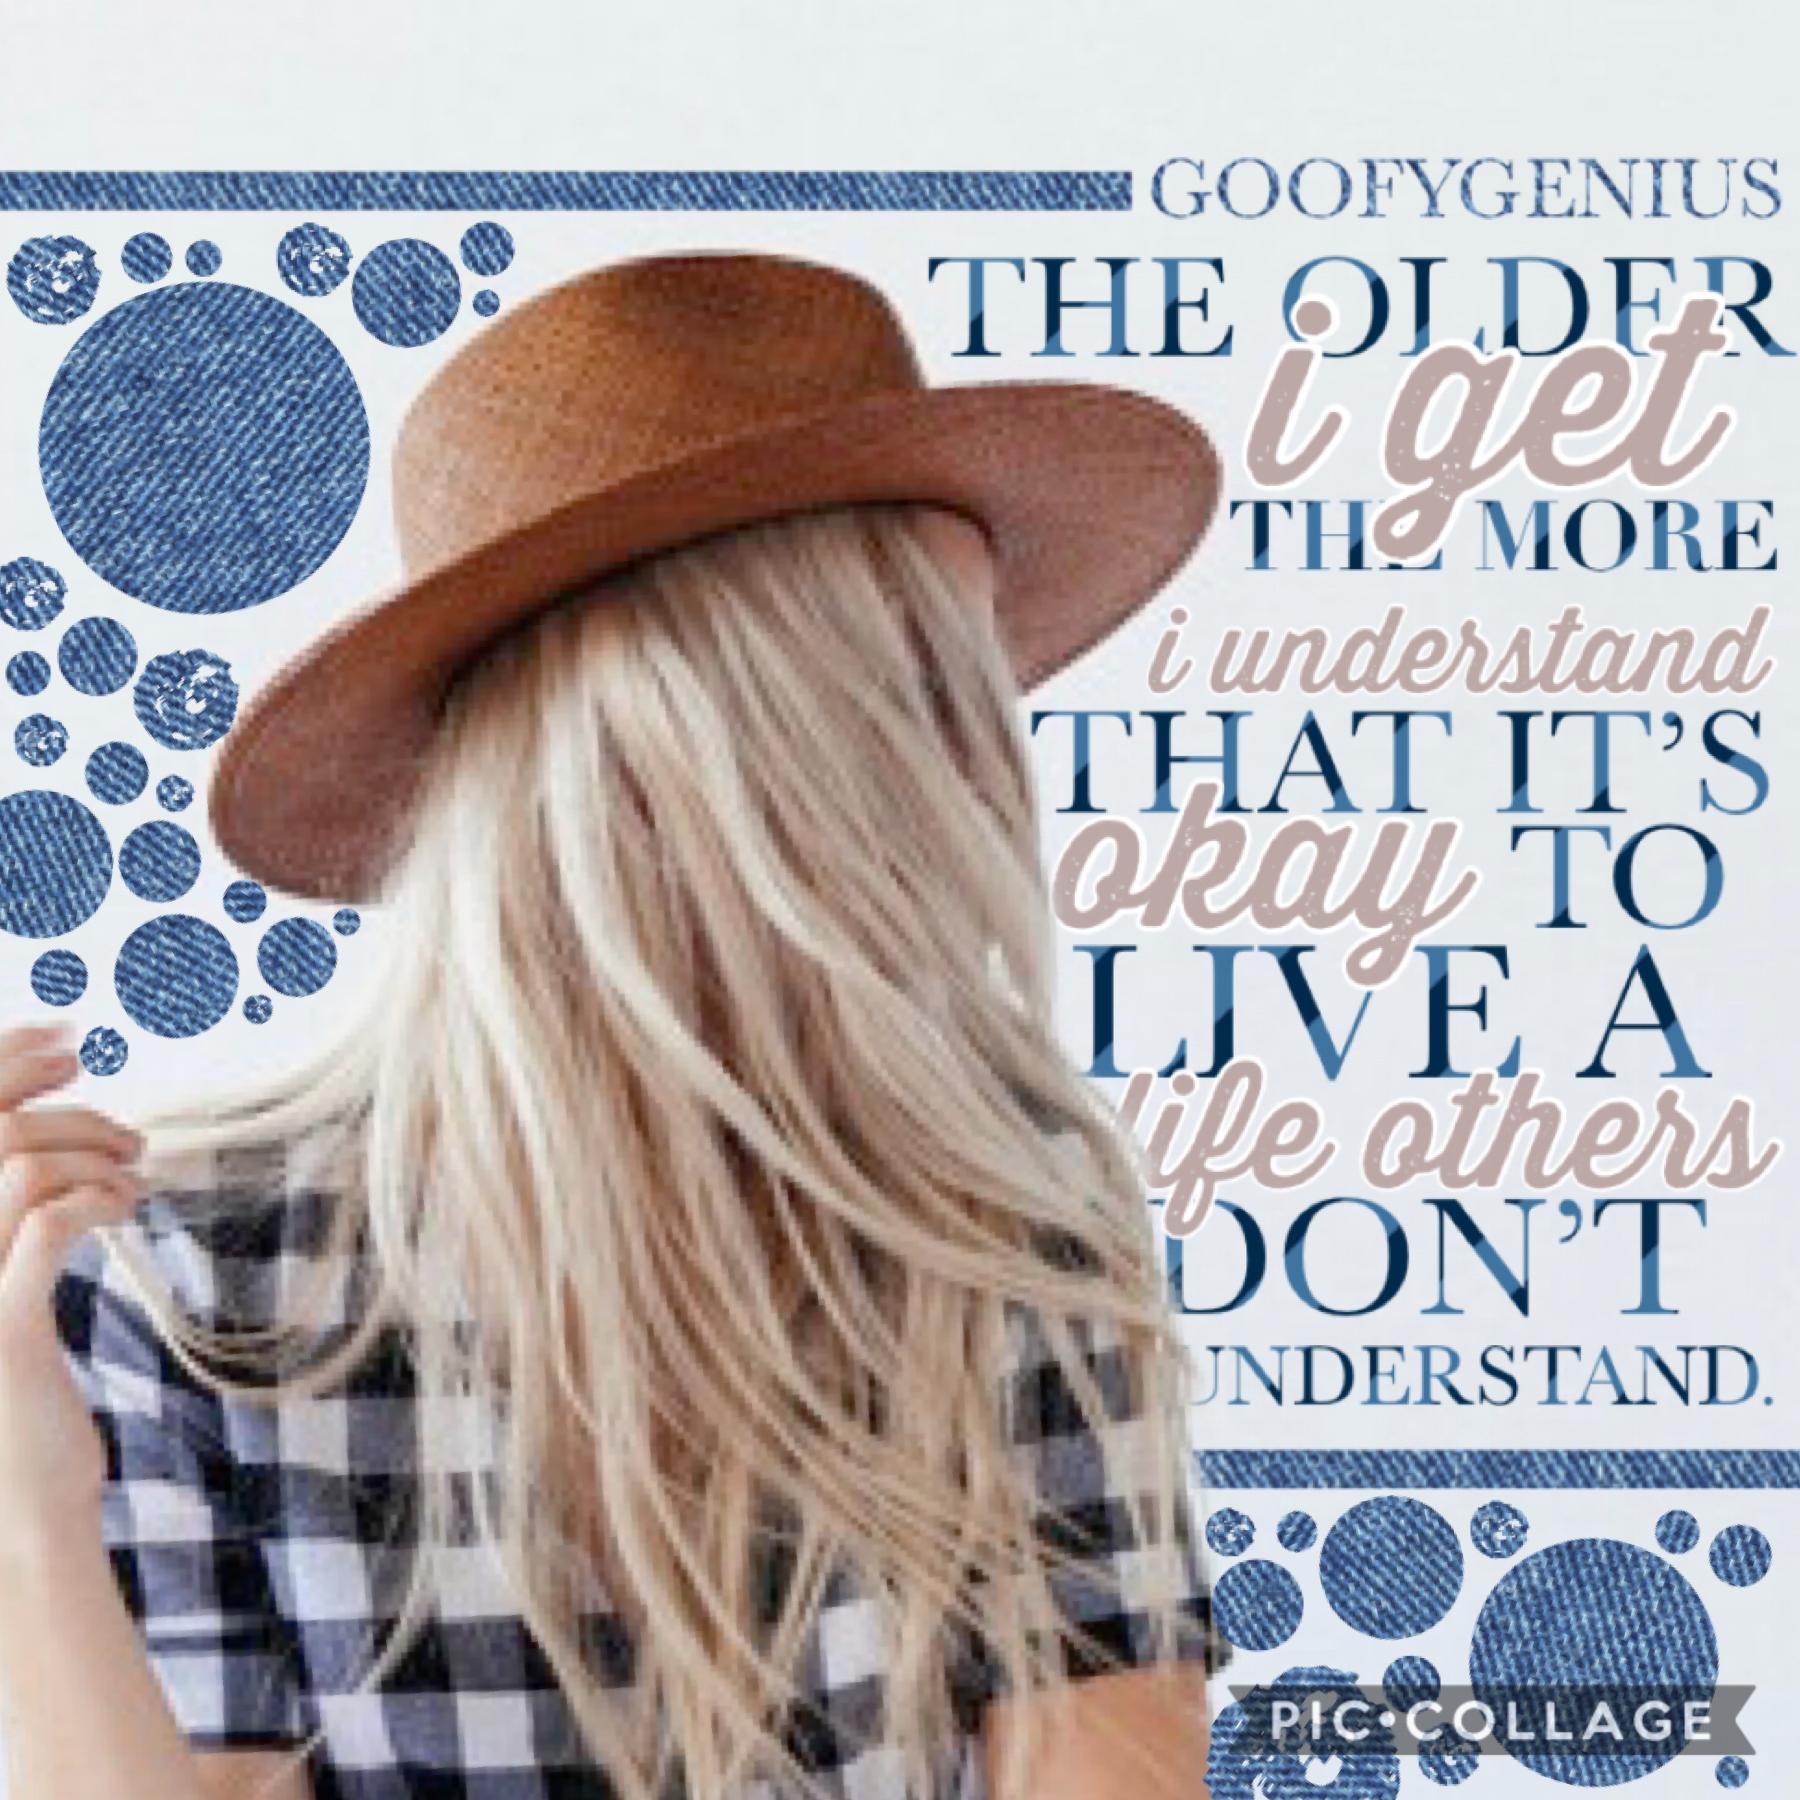 💠Tap Here💠
Sometimes I just have to step back and remember the style that I truly love doing. It’s been awhile since I felt so proud of a collage. Please rate 1-10.
QOTD: How’s online school? 
AOTD: Apparently I don’t like change. 